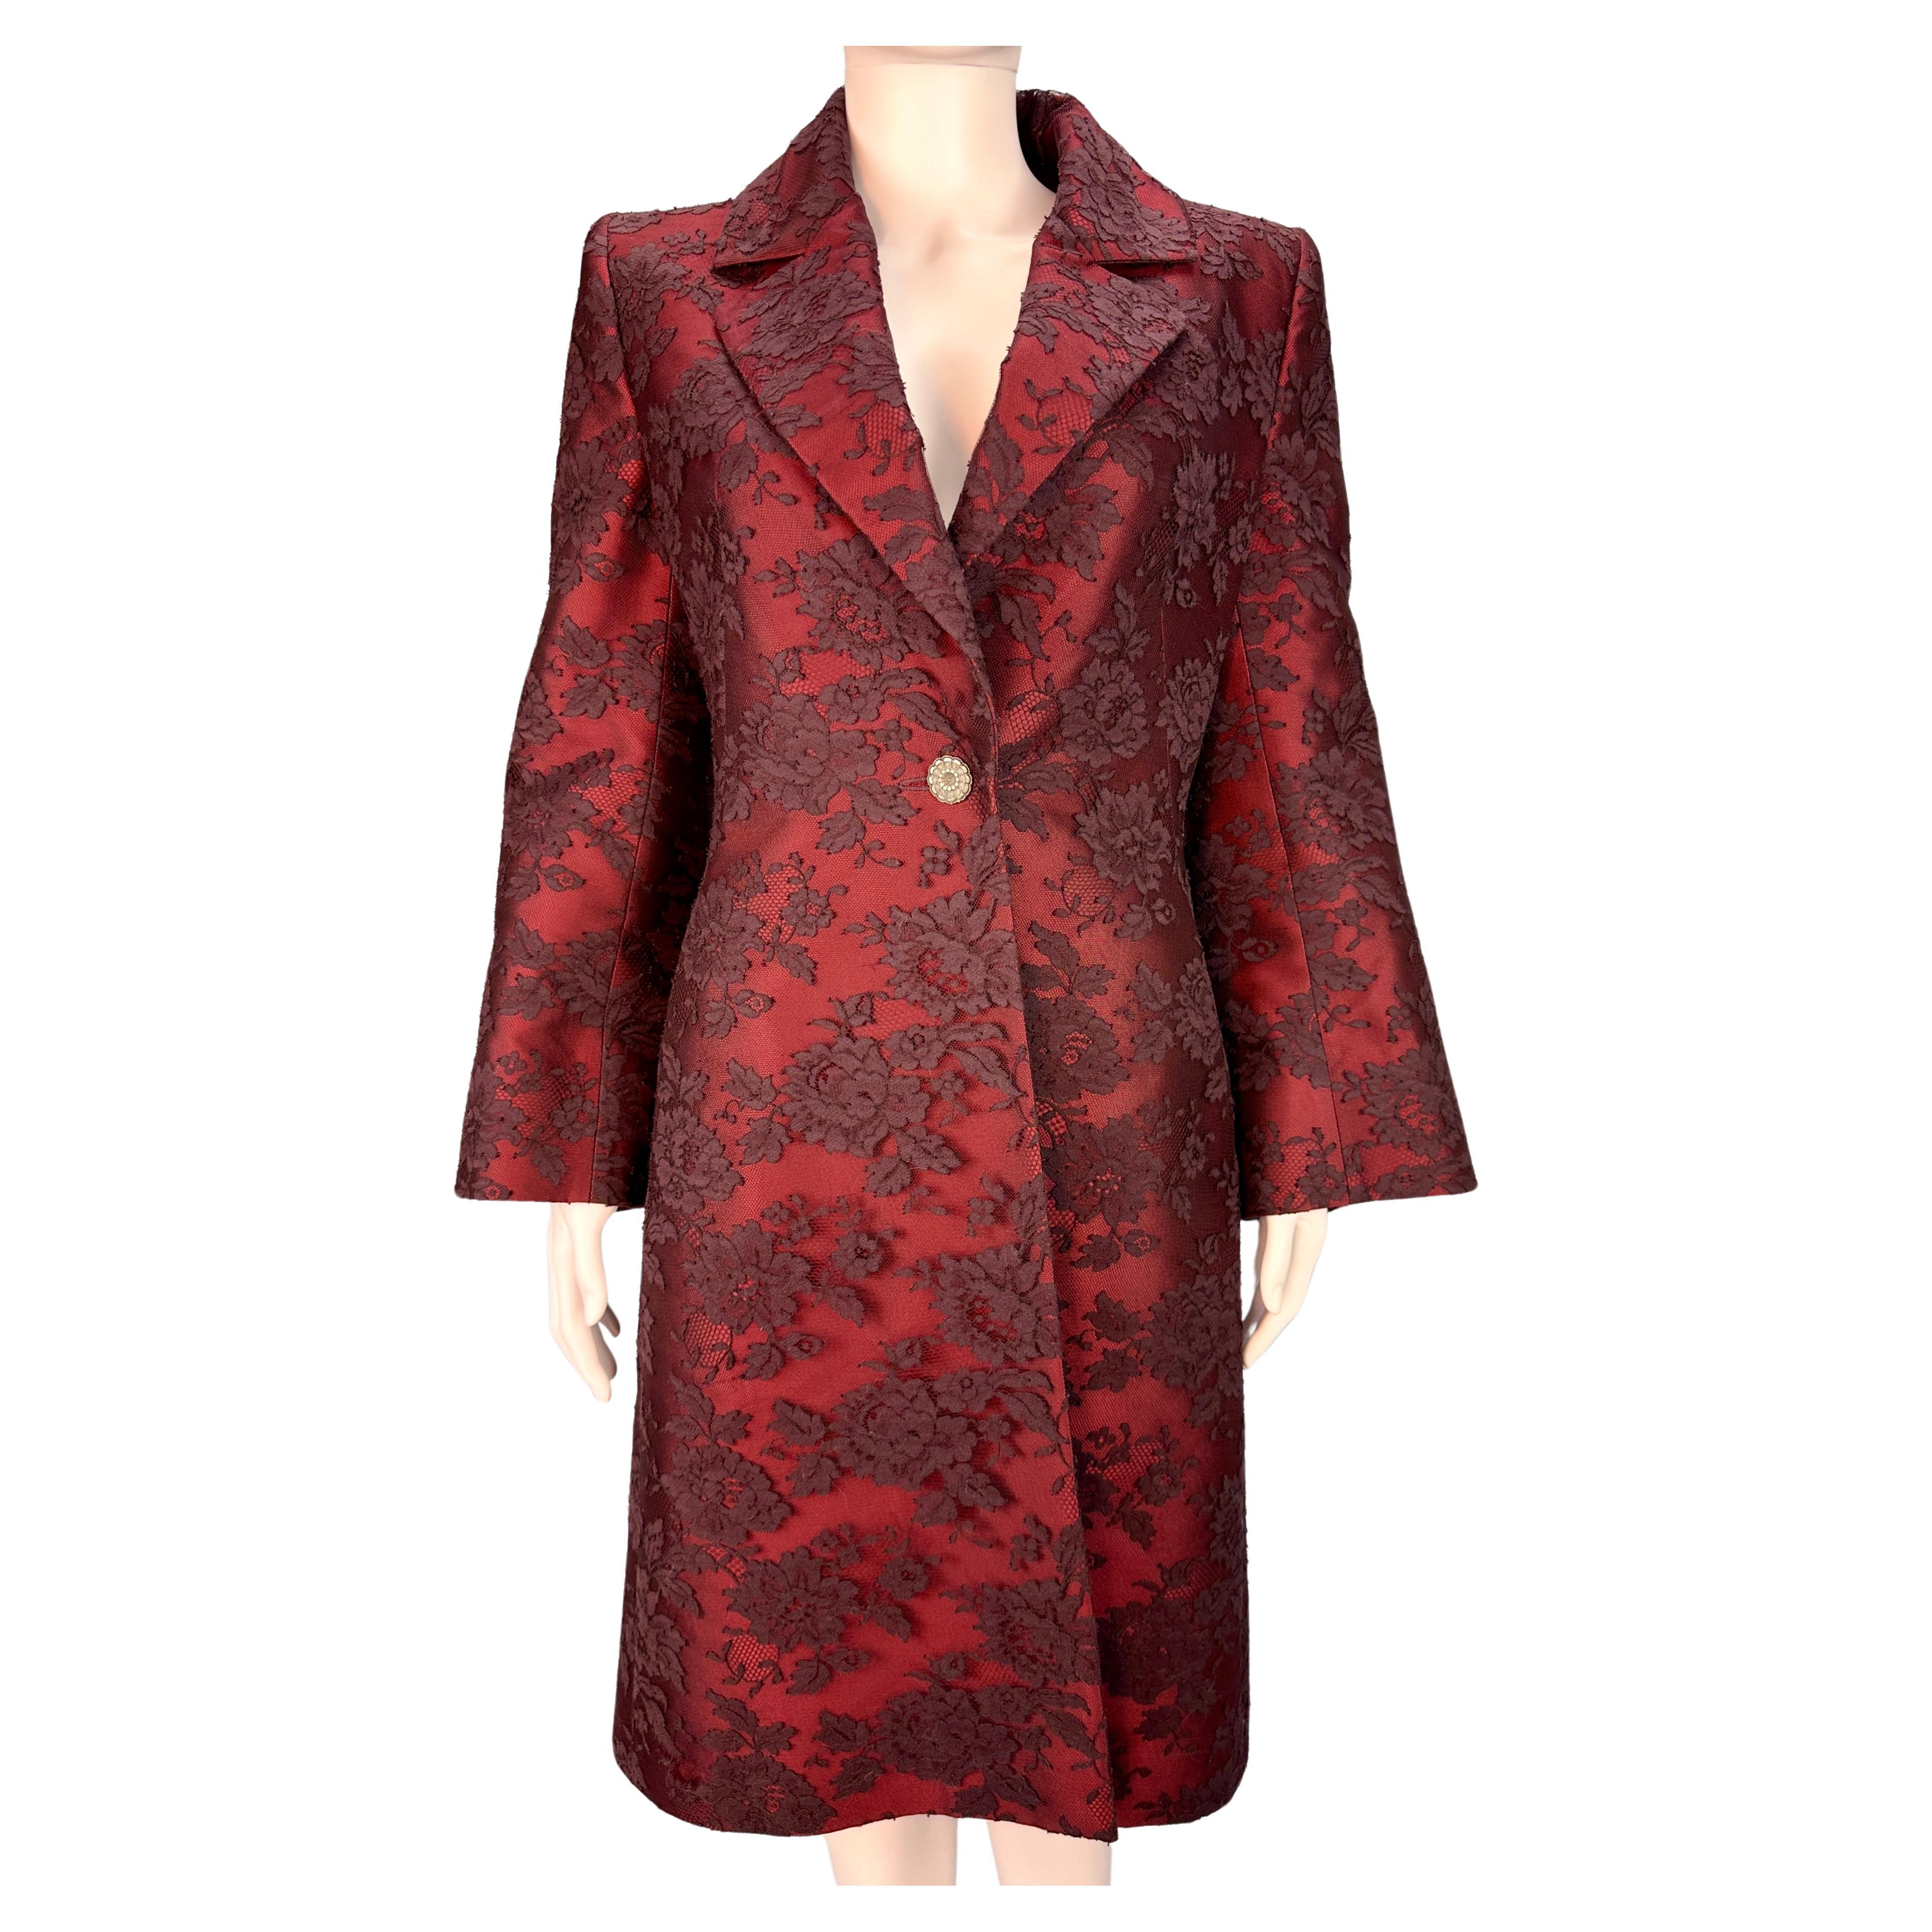 Givenchy Couture by Alexander McQueen Fall 1998 Red Silk Lace Jacket For Sale